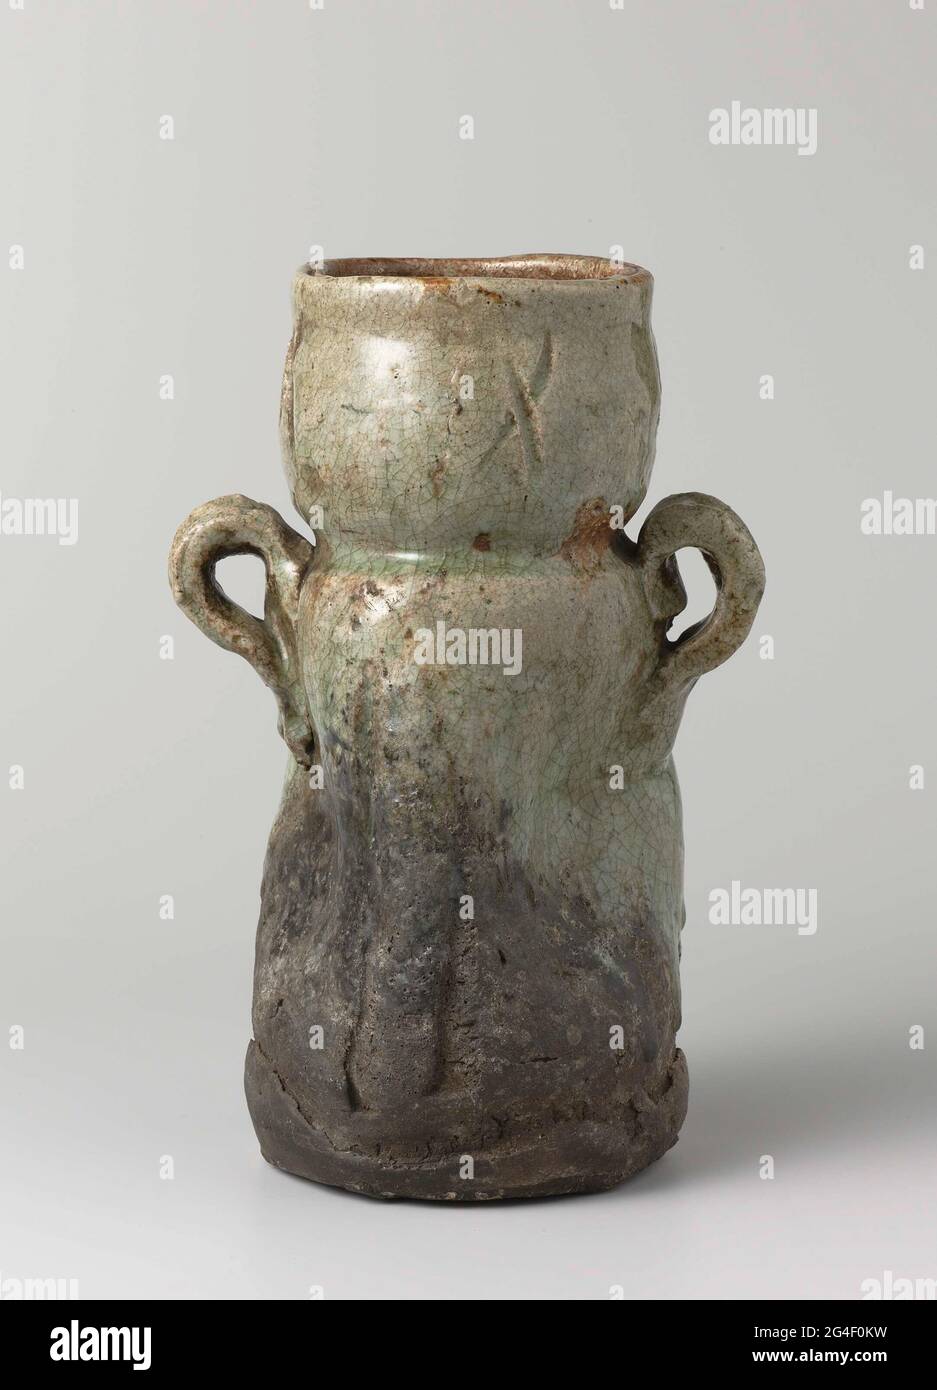 . Vase of stoneware with two ears on the shoulder, partly covered with a celadongin glaze. The belly is dented and four times a rubbing cross on the neck. The lower part of the vase is unglazed. Old dealer label on the bottom with 'N.V. Hammer - Far Eastern Art New York / 440 '. I go. Stock Photo